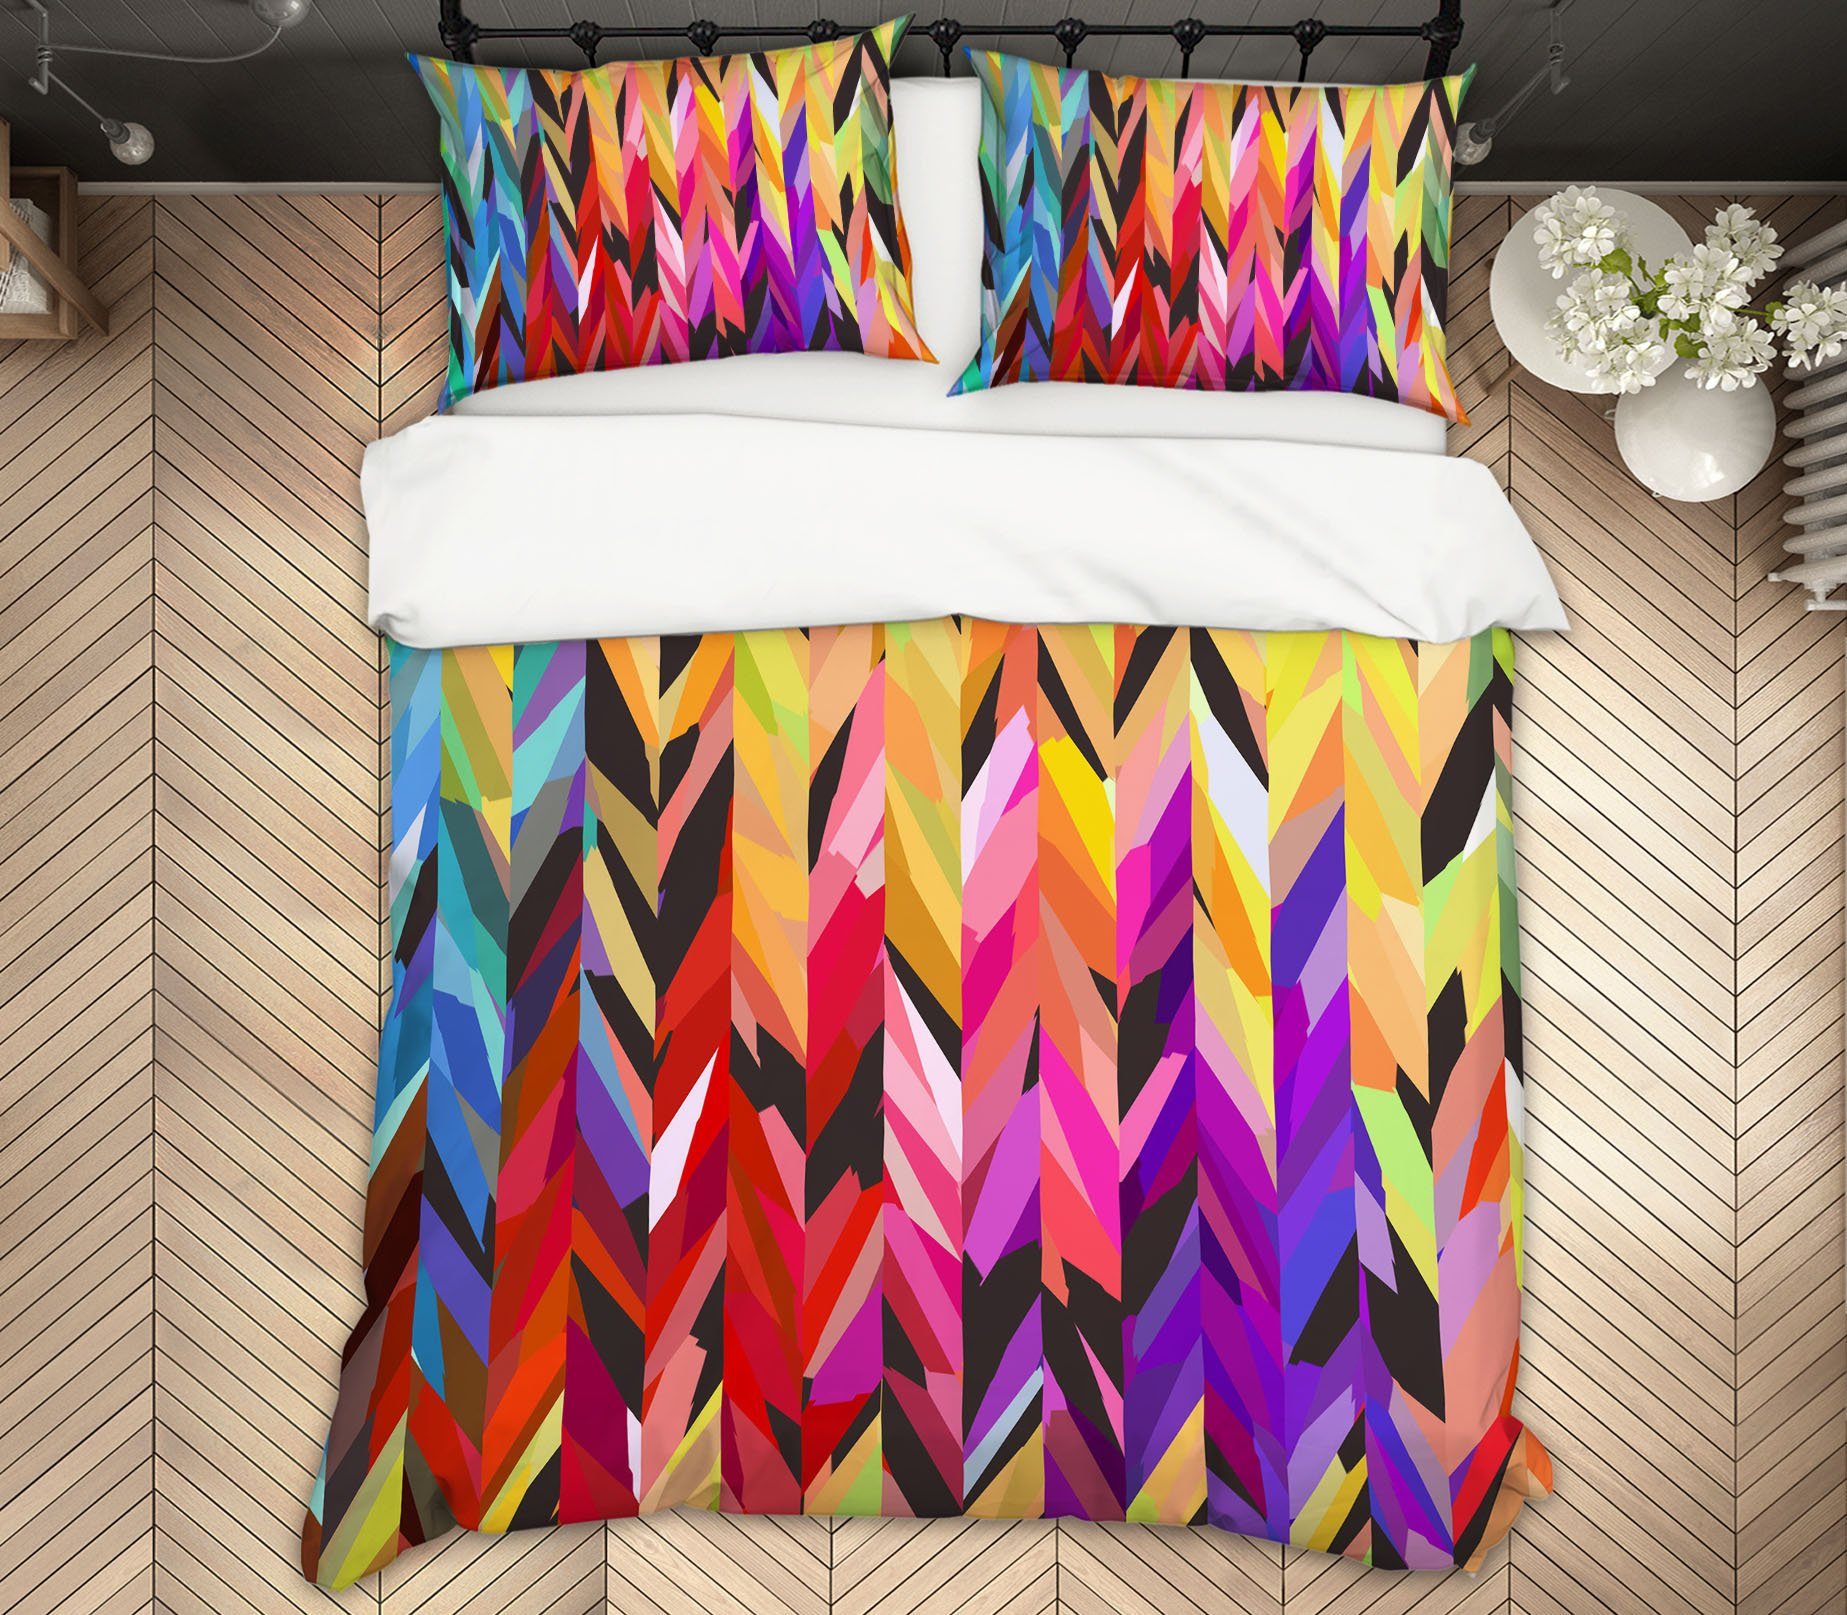 3D Burst of Color 20118 Shandra Smith Bedding Bed Pillowcases Quilt Quiet Covers AJ Creativity Home 